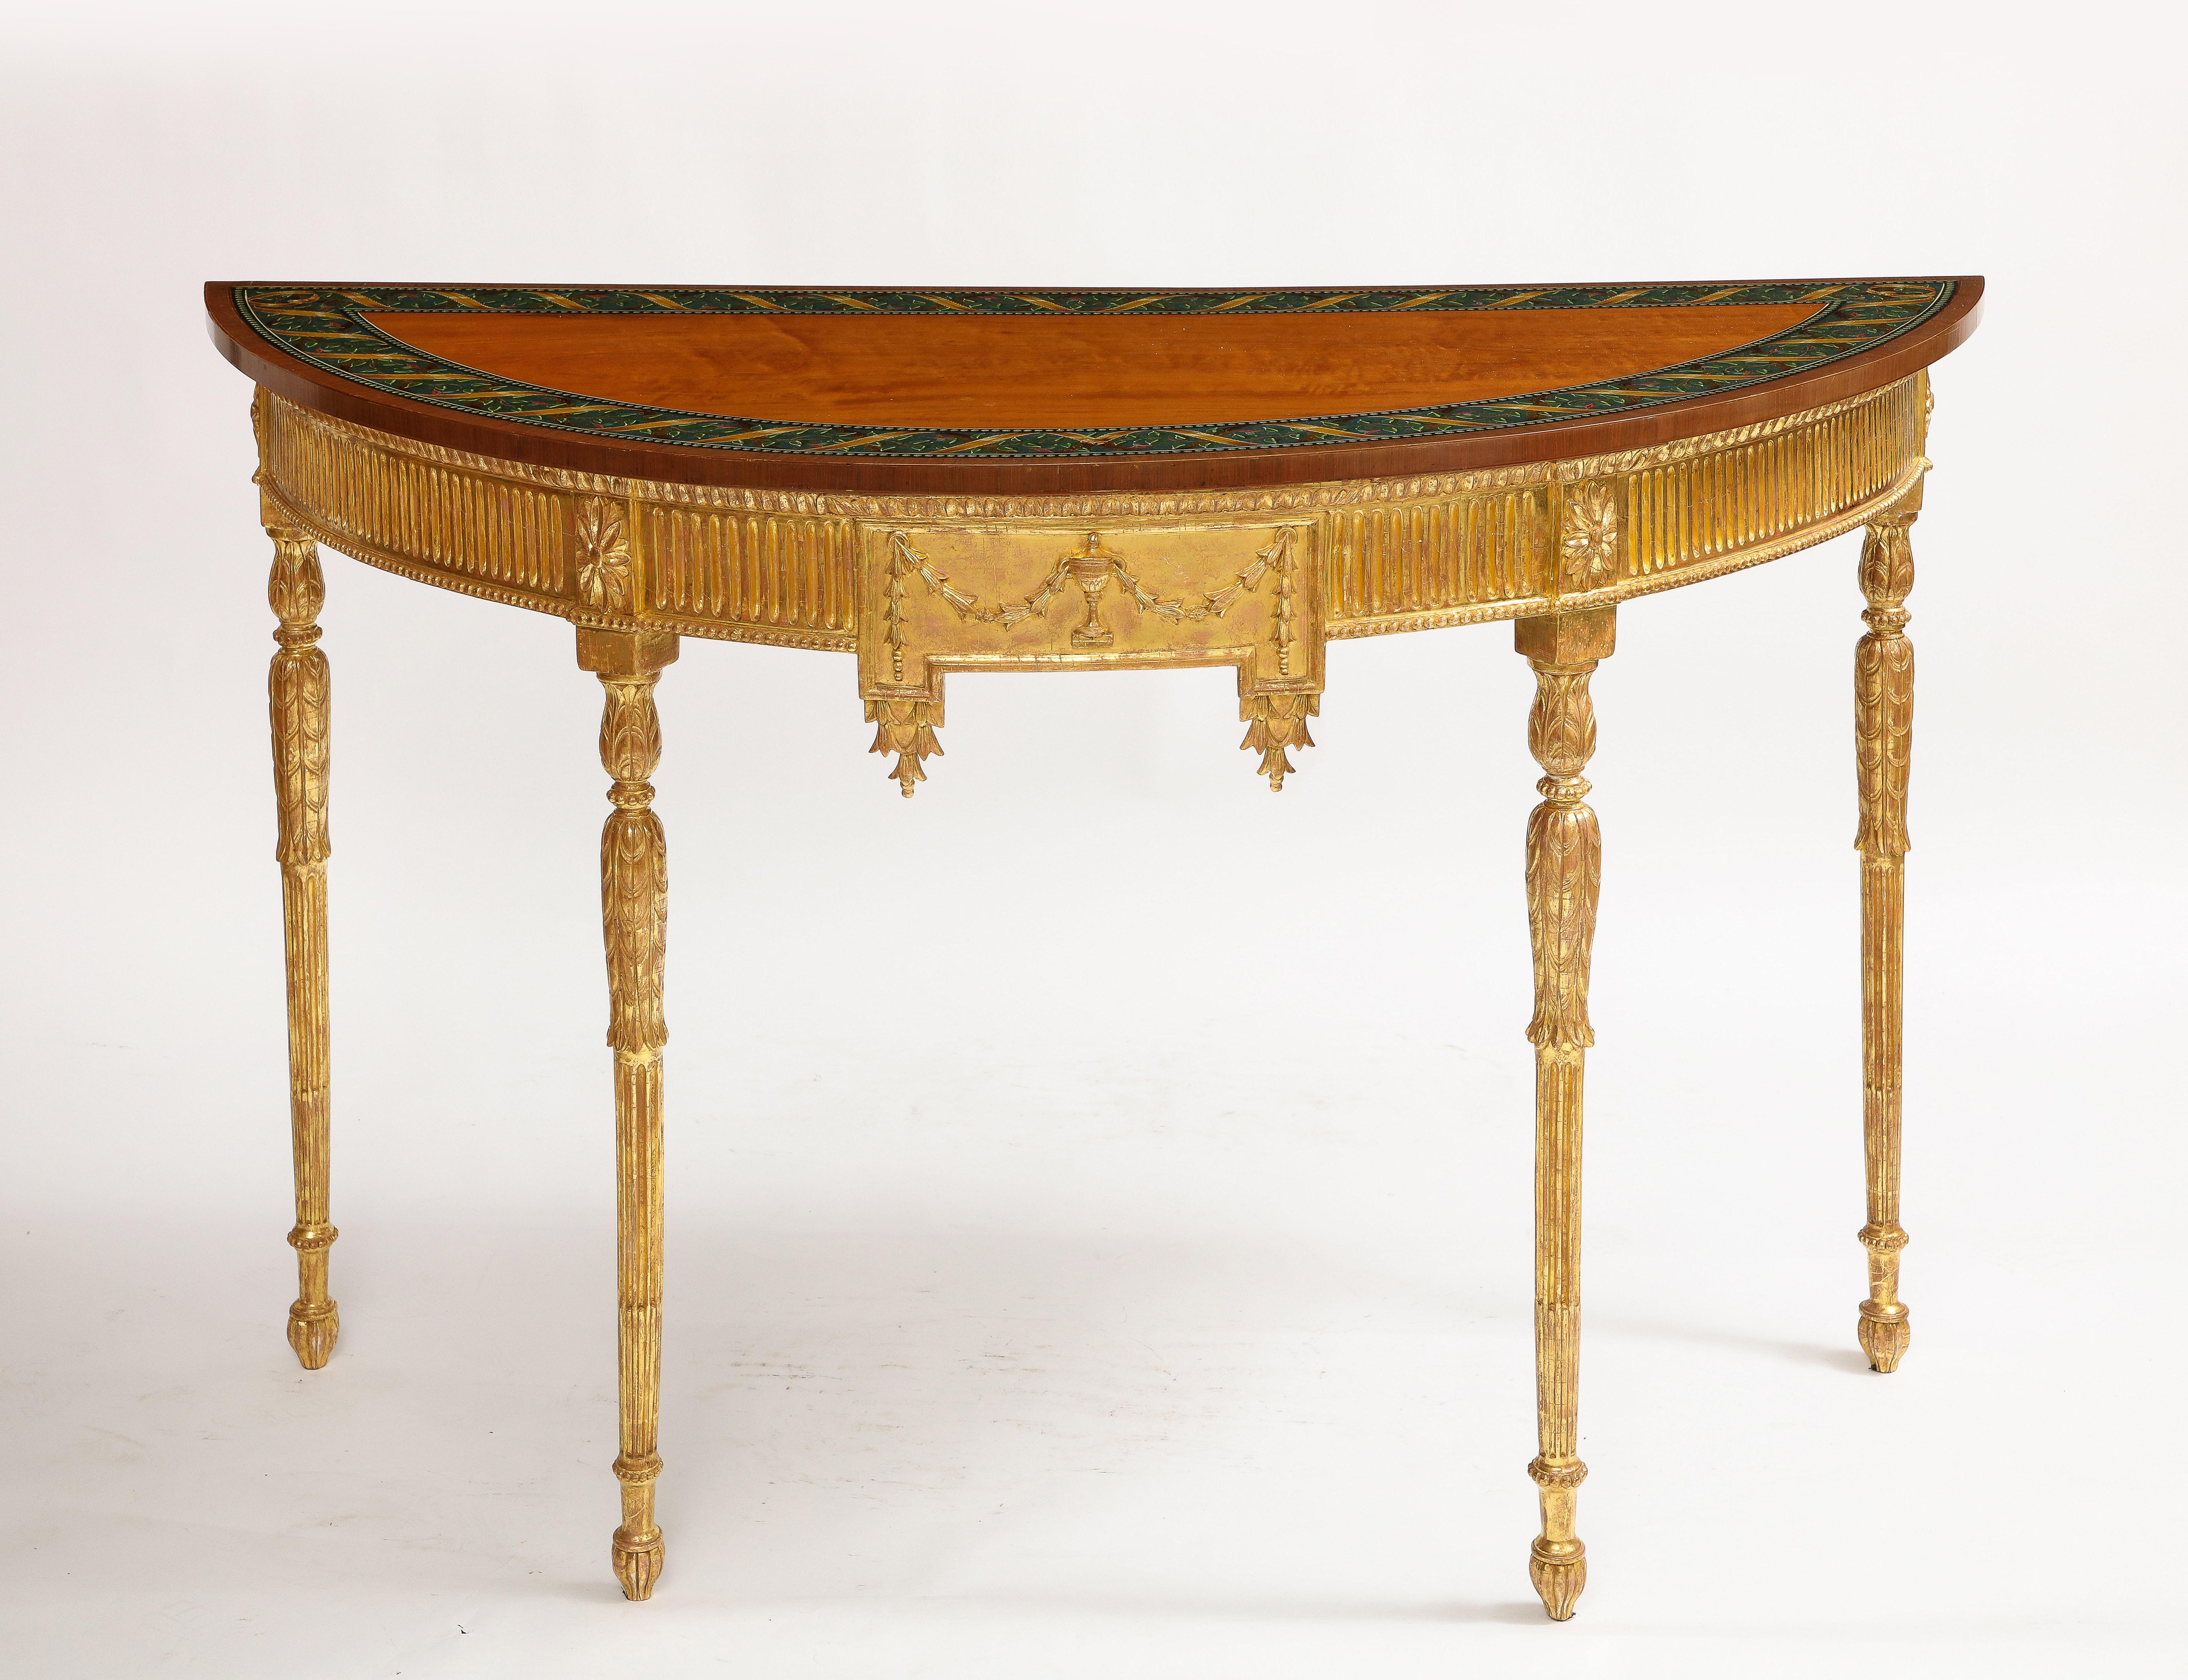 A Fabulous Pair of 18th Century George III Hand-Carved Gilt-Wood Demi-lune Console Tables w/ Painted Floral Still Life Tops. Each top elaborately hand-painted with Floral Still Life designs, the legs headed with rosettes and carved and fluted,